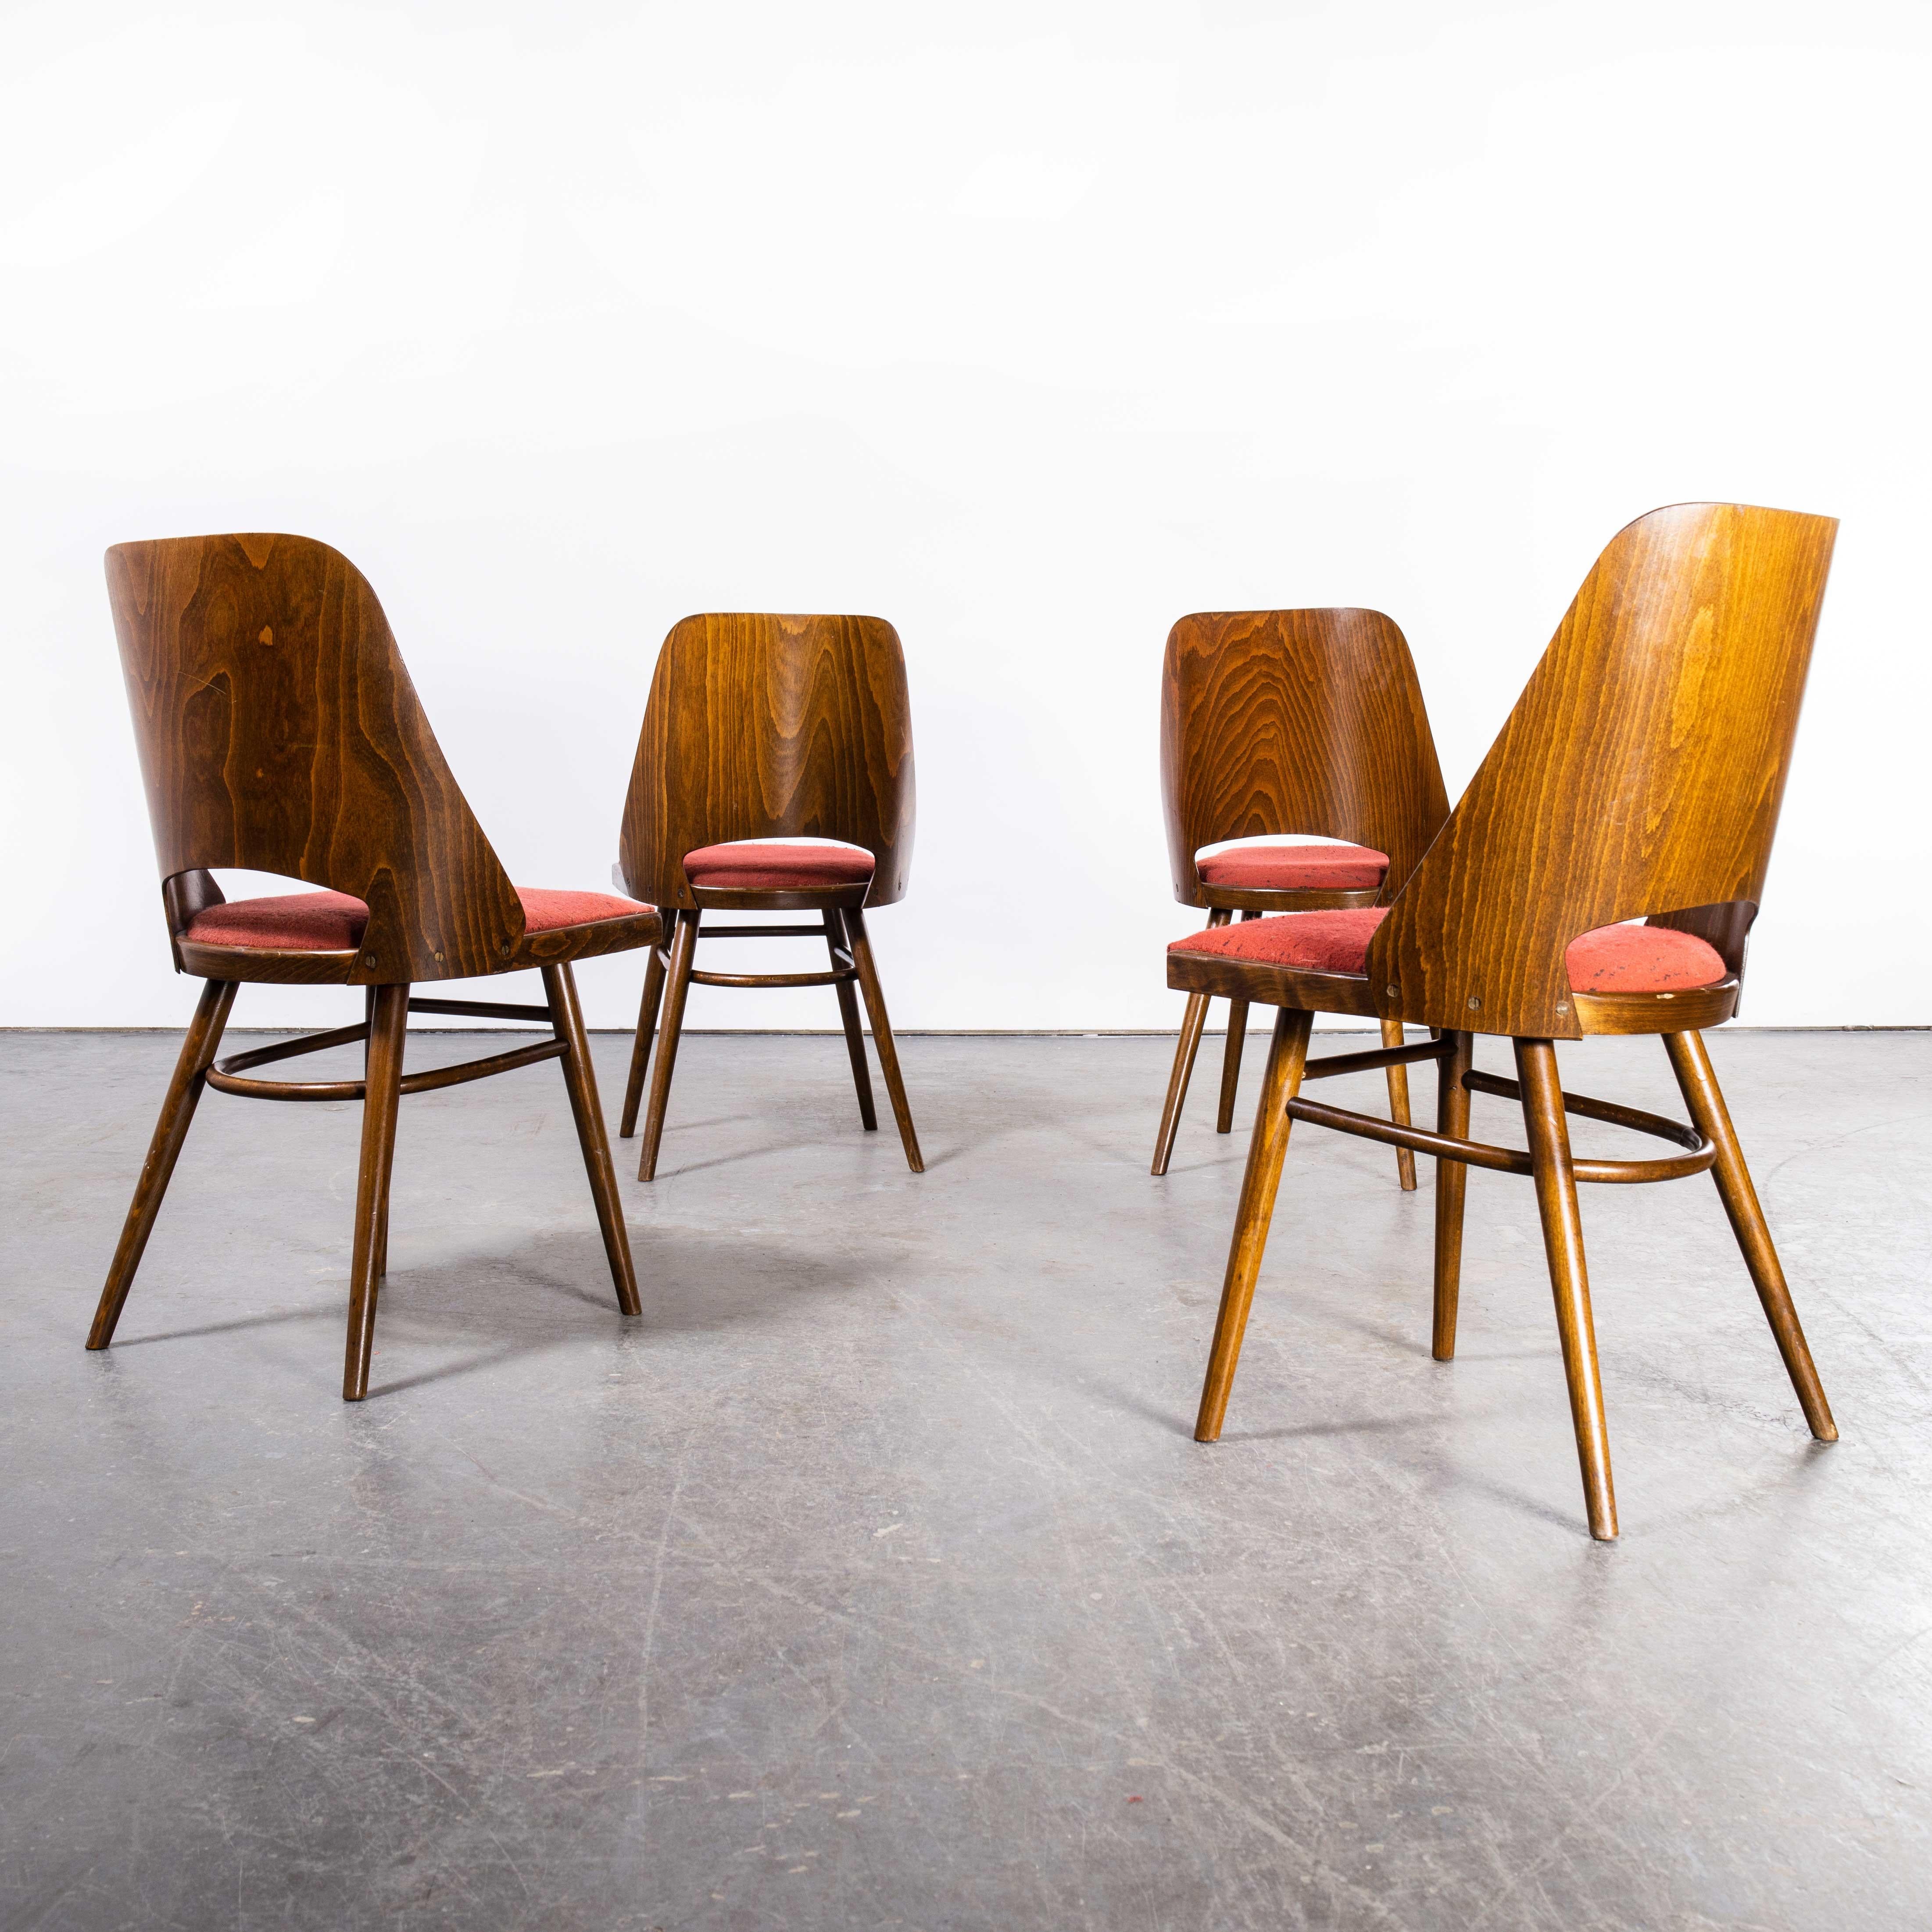 1950's Upholstered Thon Warm Oak Dining Chairs by Radomir Hoffman, Set of Four For Sale 1